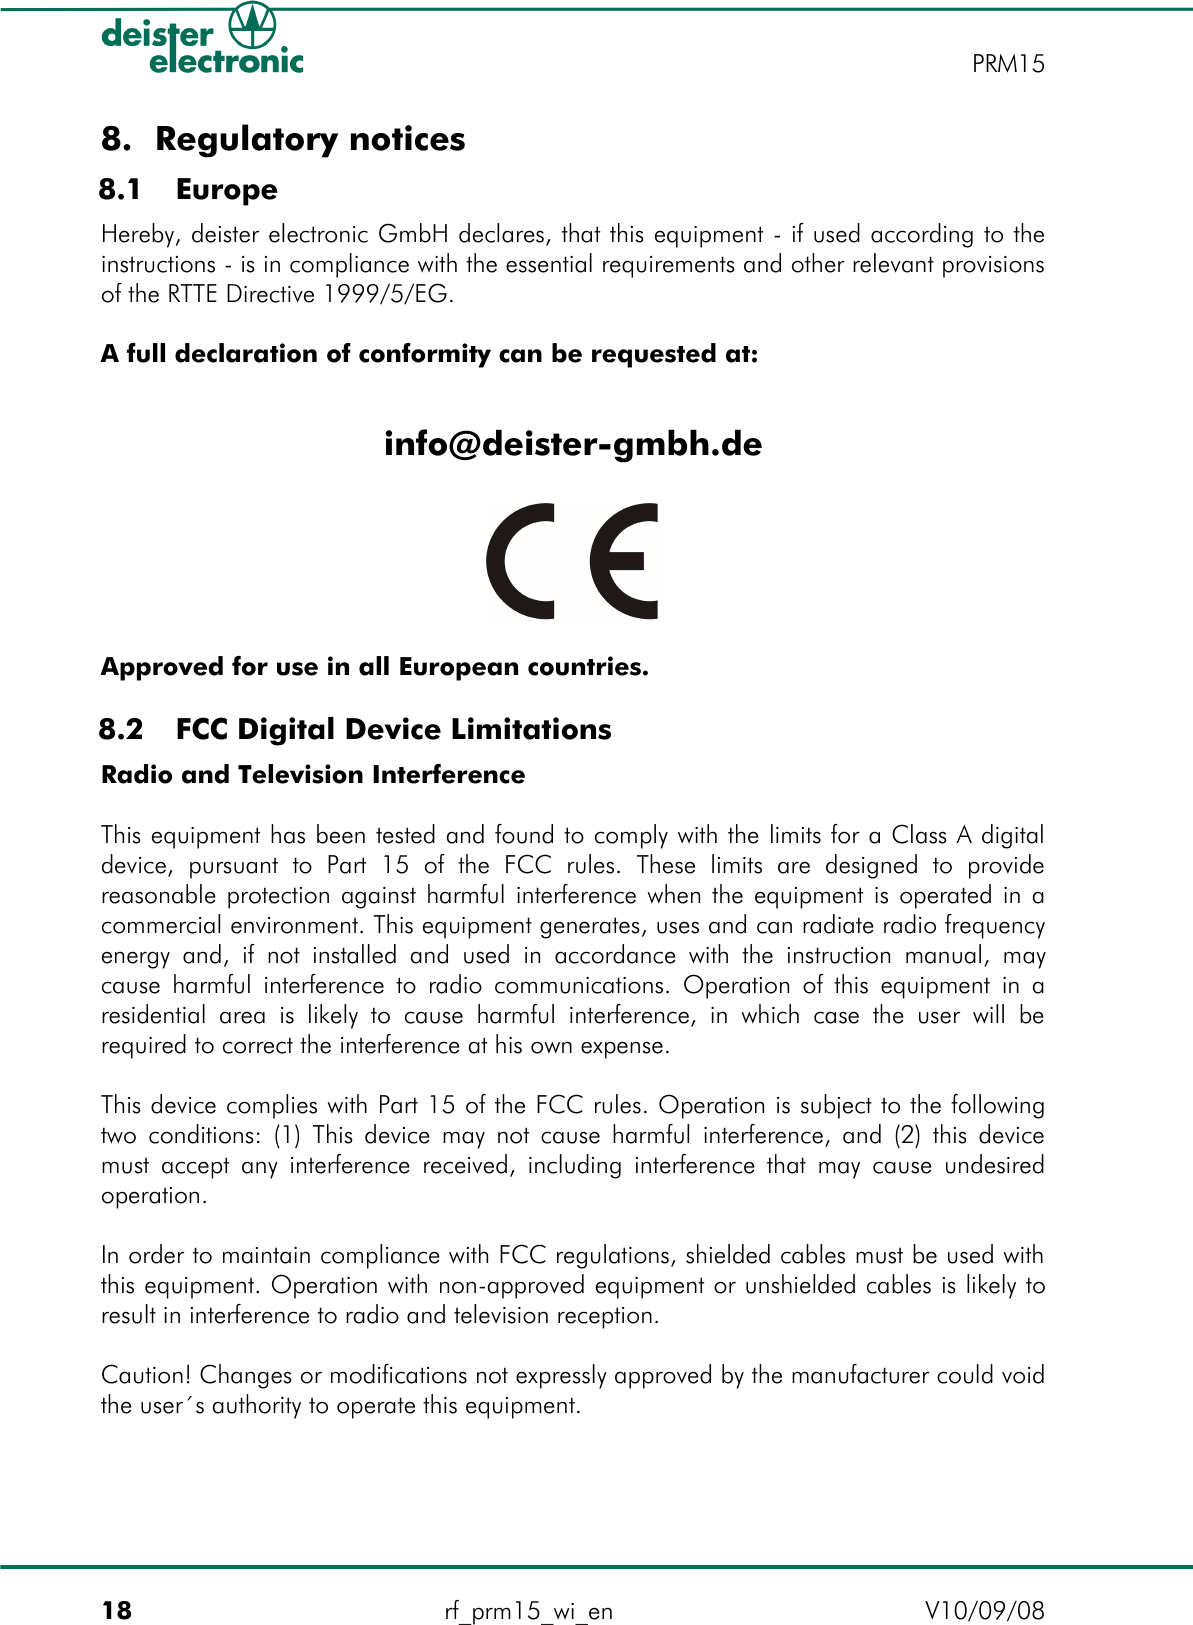 8. Regulatory notices 8.1  EuropeHereby, deister electronic GmbH declares, that this equipment - if used according to the instructions - is in compliance with the essential requirements and other relevant provisions of the RTTE Directive 1999/5/EG.A full declaration of conformity can be requested at:info@deister-gmbh.deApproved for use in all European countries. 8.2  FCC Digital Device LimitationsRadio and Television InterferenceThis equipment has been tested and found to comply with the limits for a Class A digital device,  pursuant  to Part  15  of   the  FCC  rules.  These  limits  are  designed  to provide reasonable protection against harmful interference when the equipment is operated in a commercial environment. This equipment generates, uses and can radiate radio frequency energy and, if not installed and used in accordance with the instruction manual, may cause harmful interference to radio communications. Operation of this equipment in a residential area is likely to cause harmful interference, in which case the user will be required to correct the interference at his own expense.This device complies with Part 15 of the FCC rules. Operation is subject to the following two conditions: (1) This device may not cause harmful interference, and (2) this device must accept any interference received, including interference that may cause undesired operation.In order to maintain compliance with FCC regulations, shielded cables must be used with this equipment. Operation with non-approved equipment or unshielded cables is likely to result in interference to radio and television reception.Caution! Changes or modifications not expressly approved by the manufacturer could void the user´s authority to operate this equipment.18 rf_prm15_wi_en V10/09/08PRM15